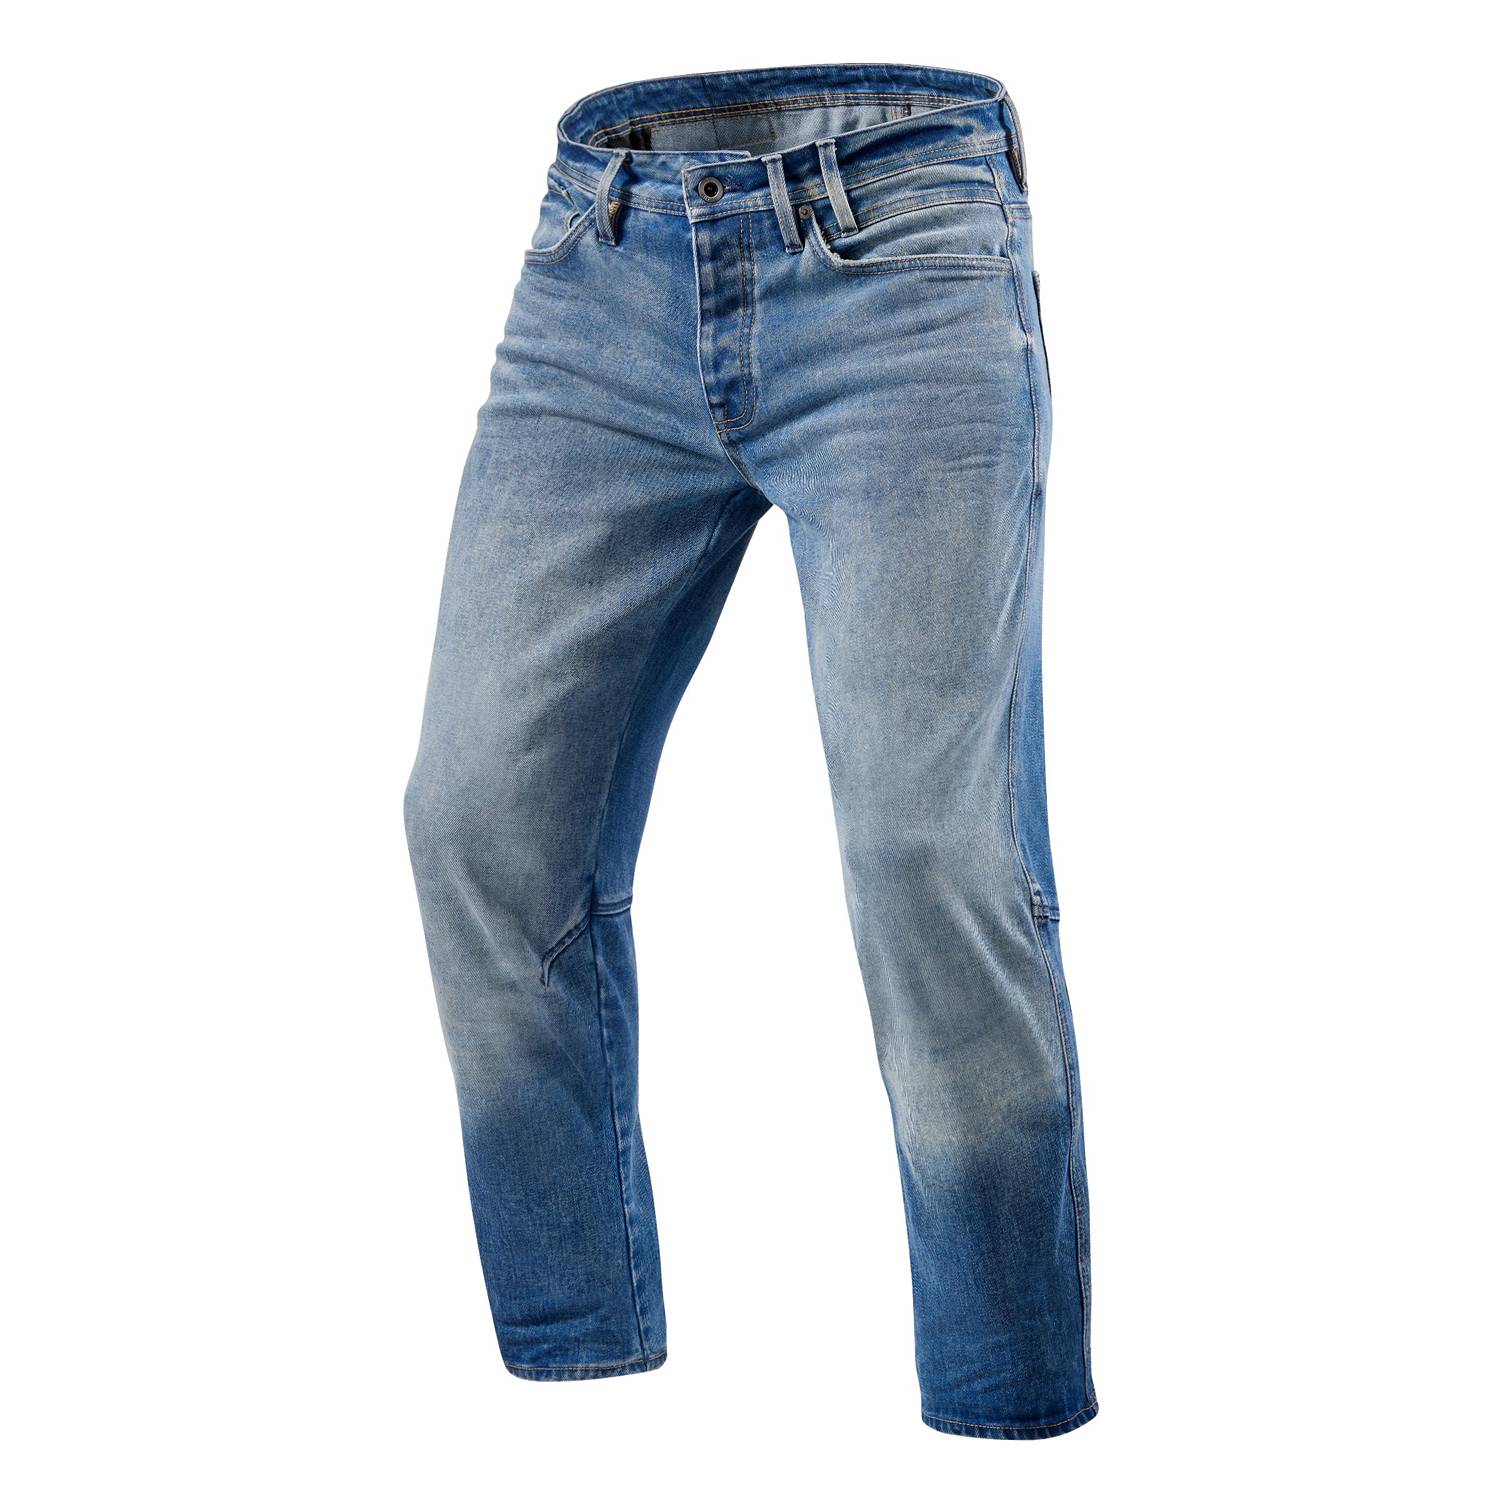 Image of EU REV'IT! Salt TF Mid Blue Used Motorcycle Jeans Taille L34/W28